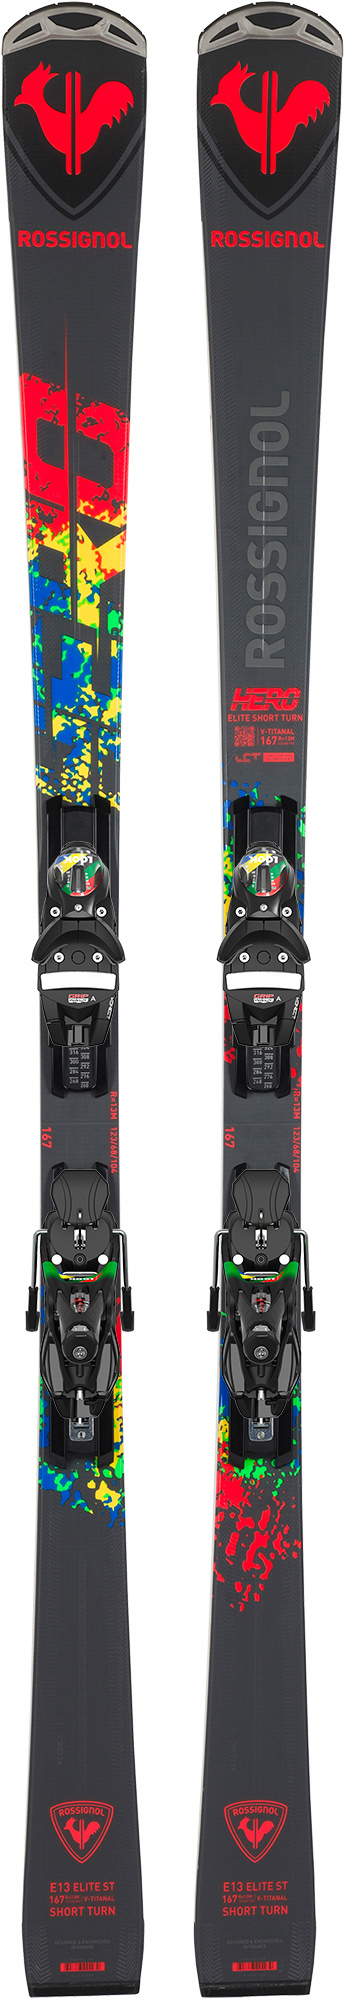 Rossignol Elite ST – Winter (Limited Goingsport Edition) TI